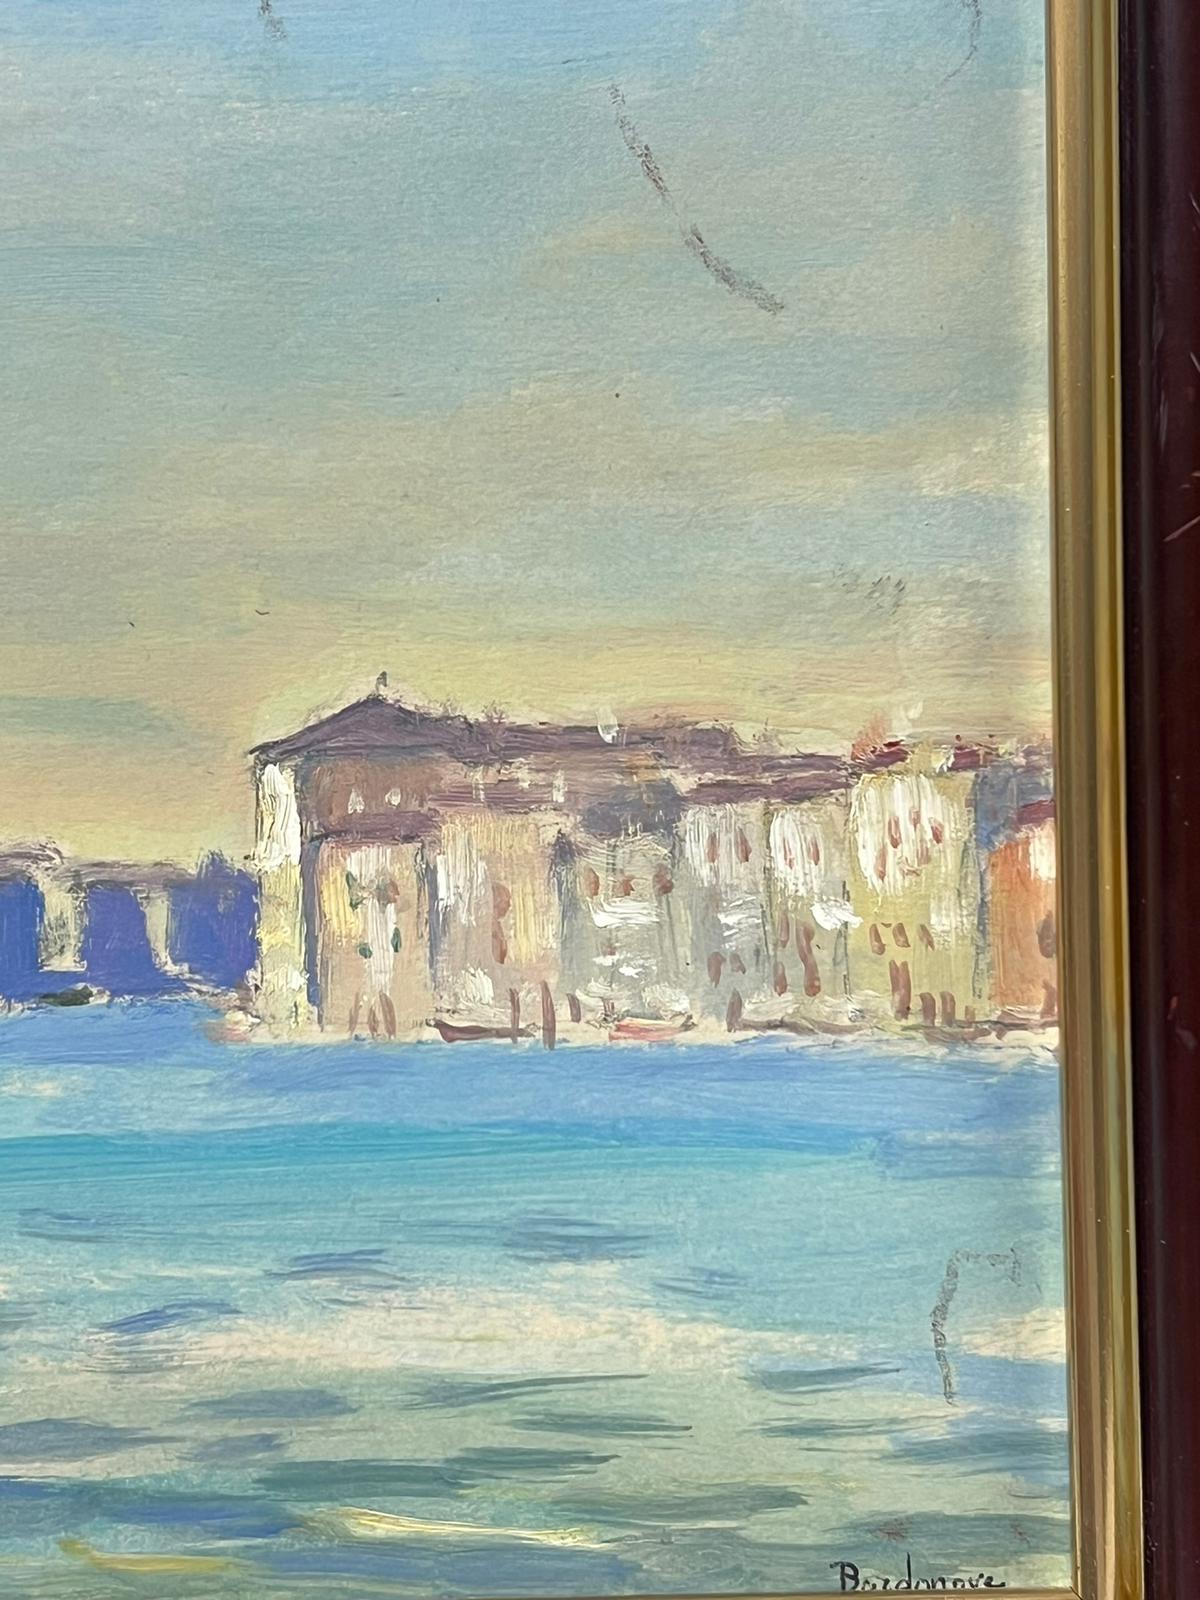 The Grand Canal, Venice
by Georges Badanove (French, contemporary)
signed oil on artist paper stuck on canvas, framed
framed: 13 x 15 inches
canvas: 9 x 10.5 inches
provenance: private collection
condition: very good and sound condition though with